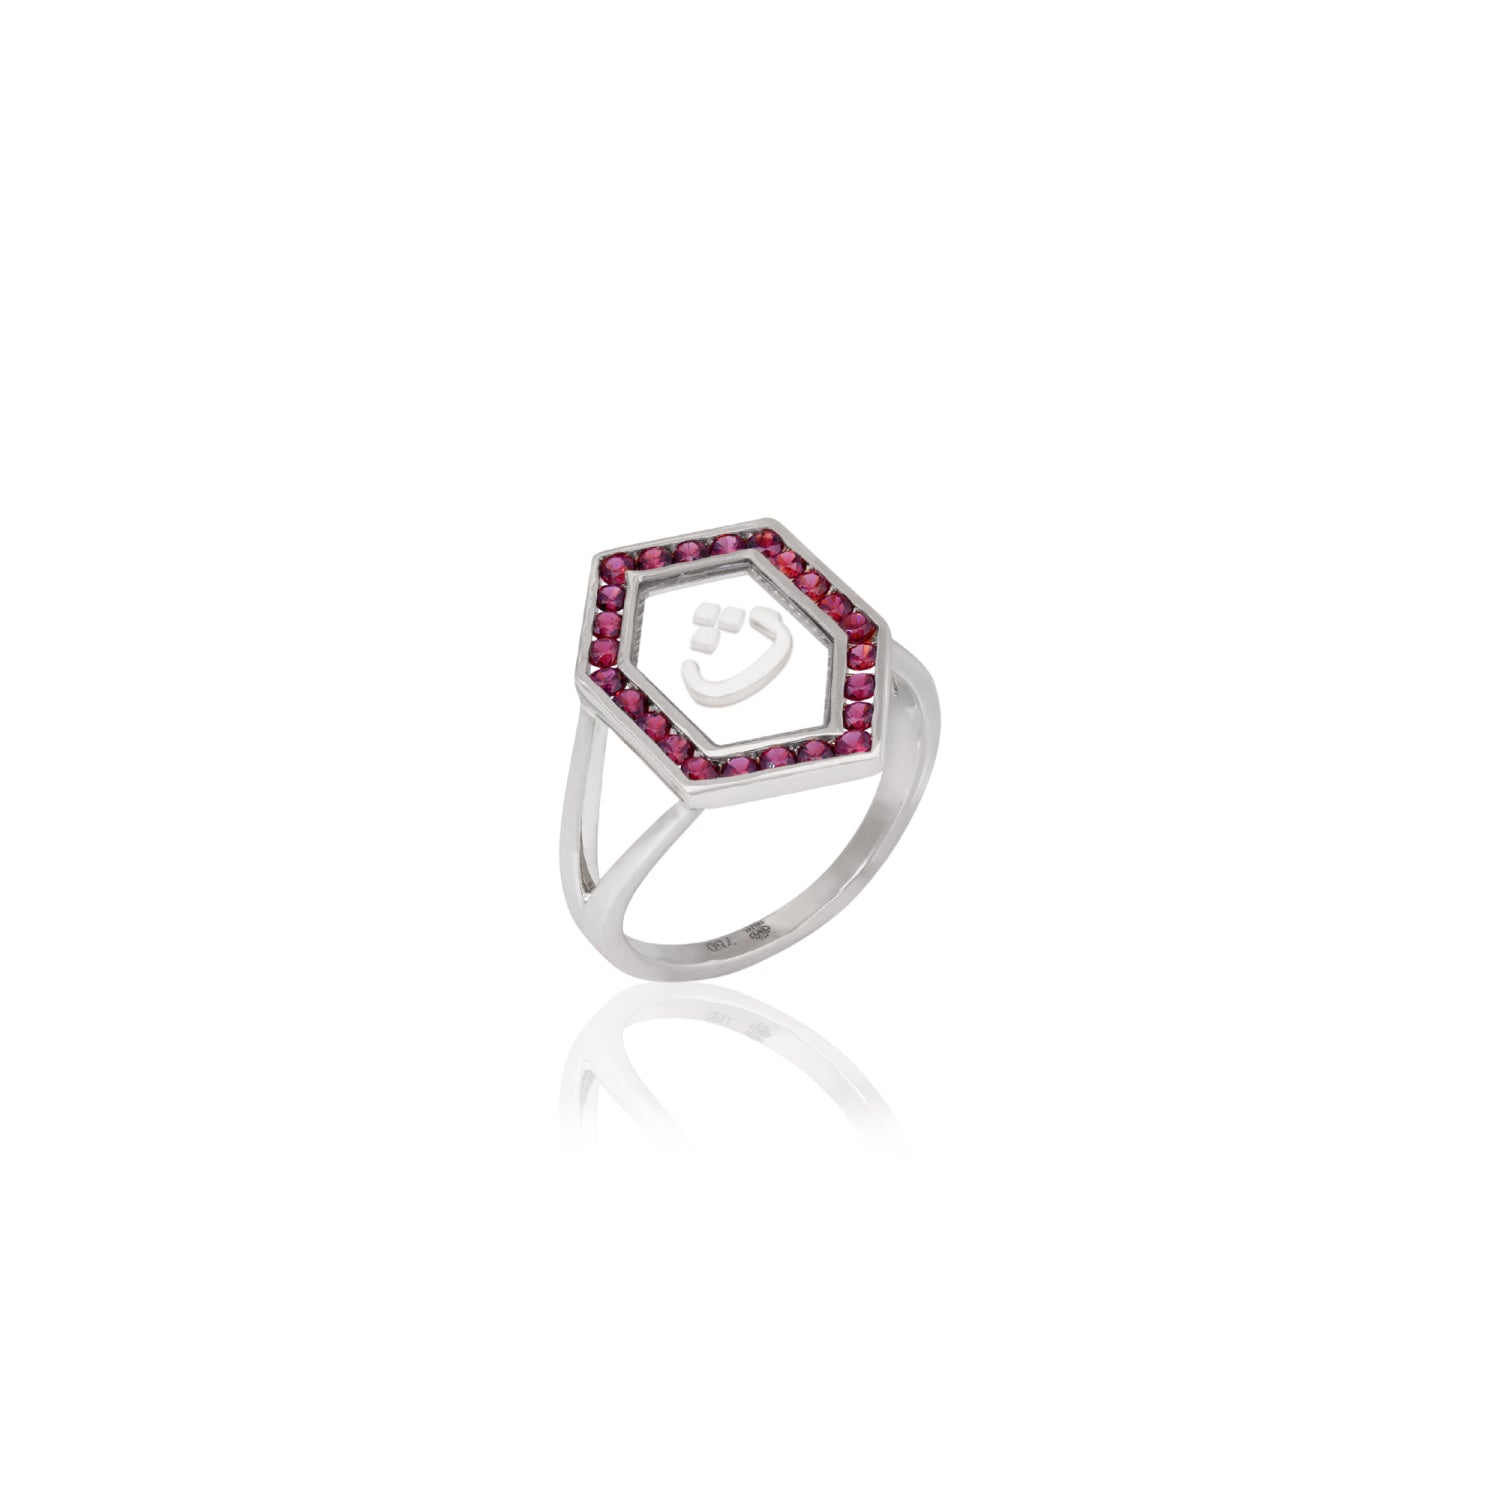 Qamoos 1.0 Letter ث Ruby Ring in White Gold